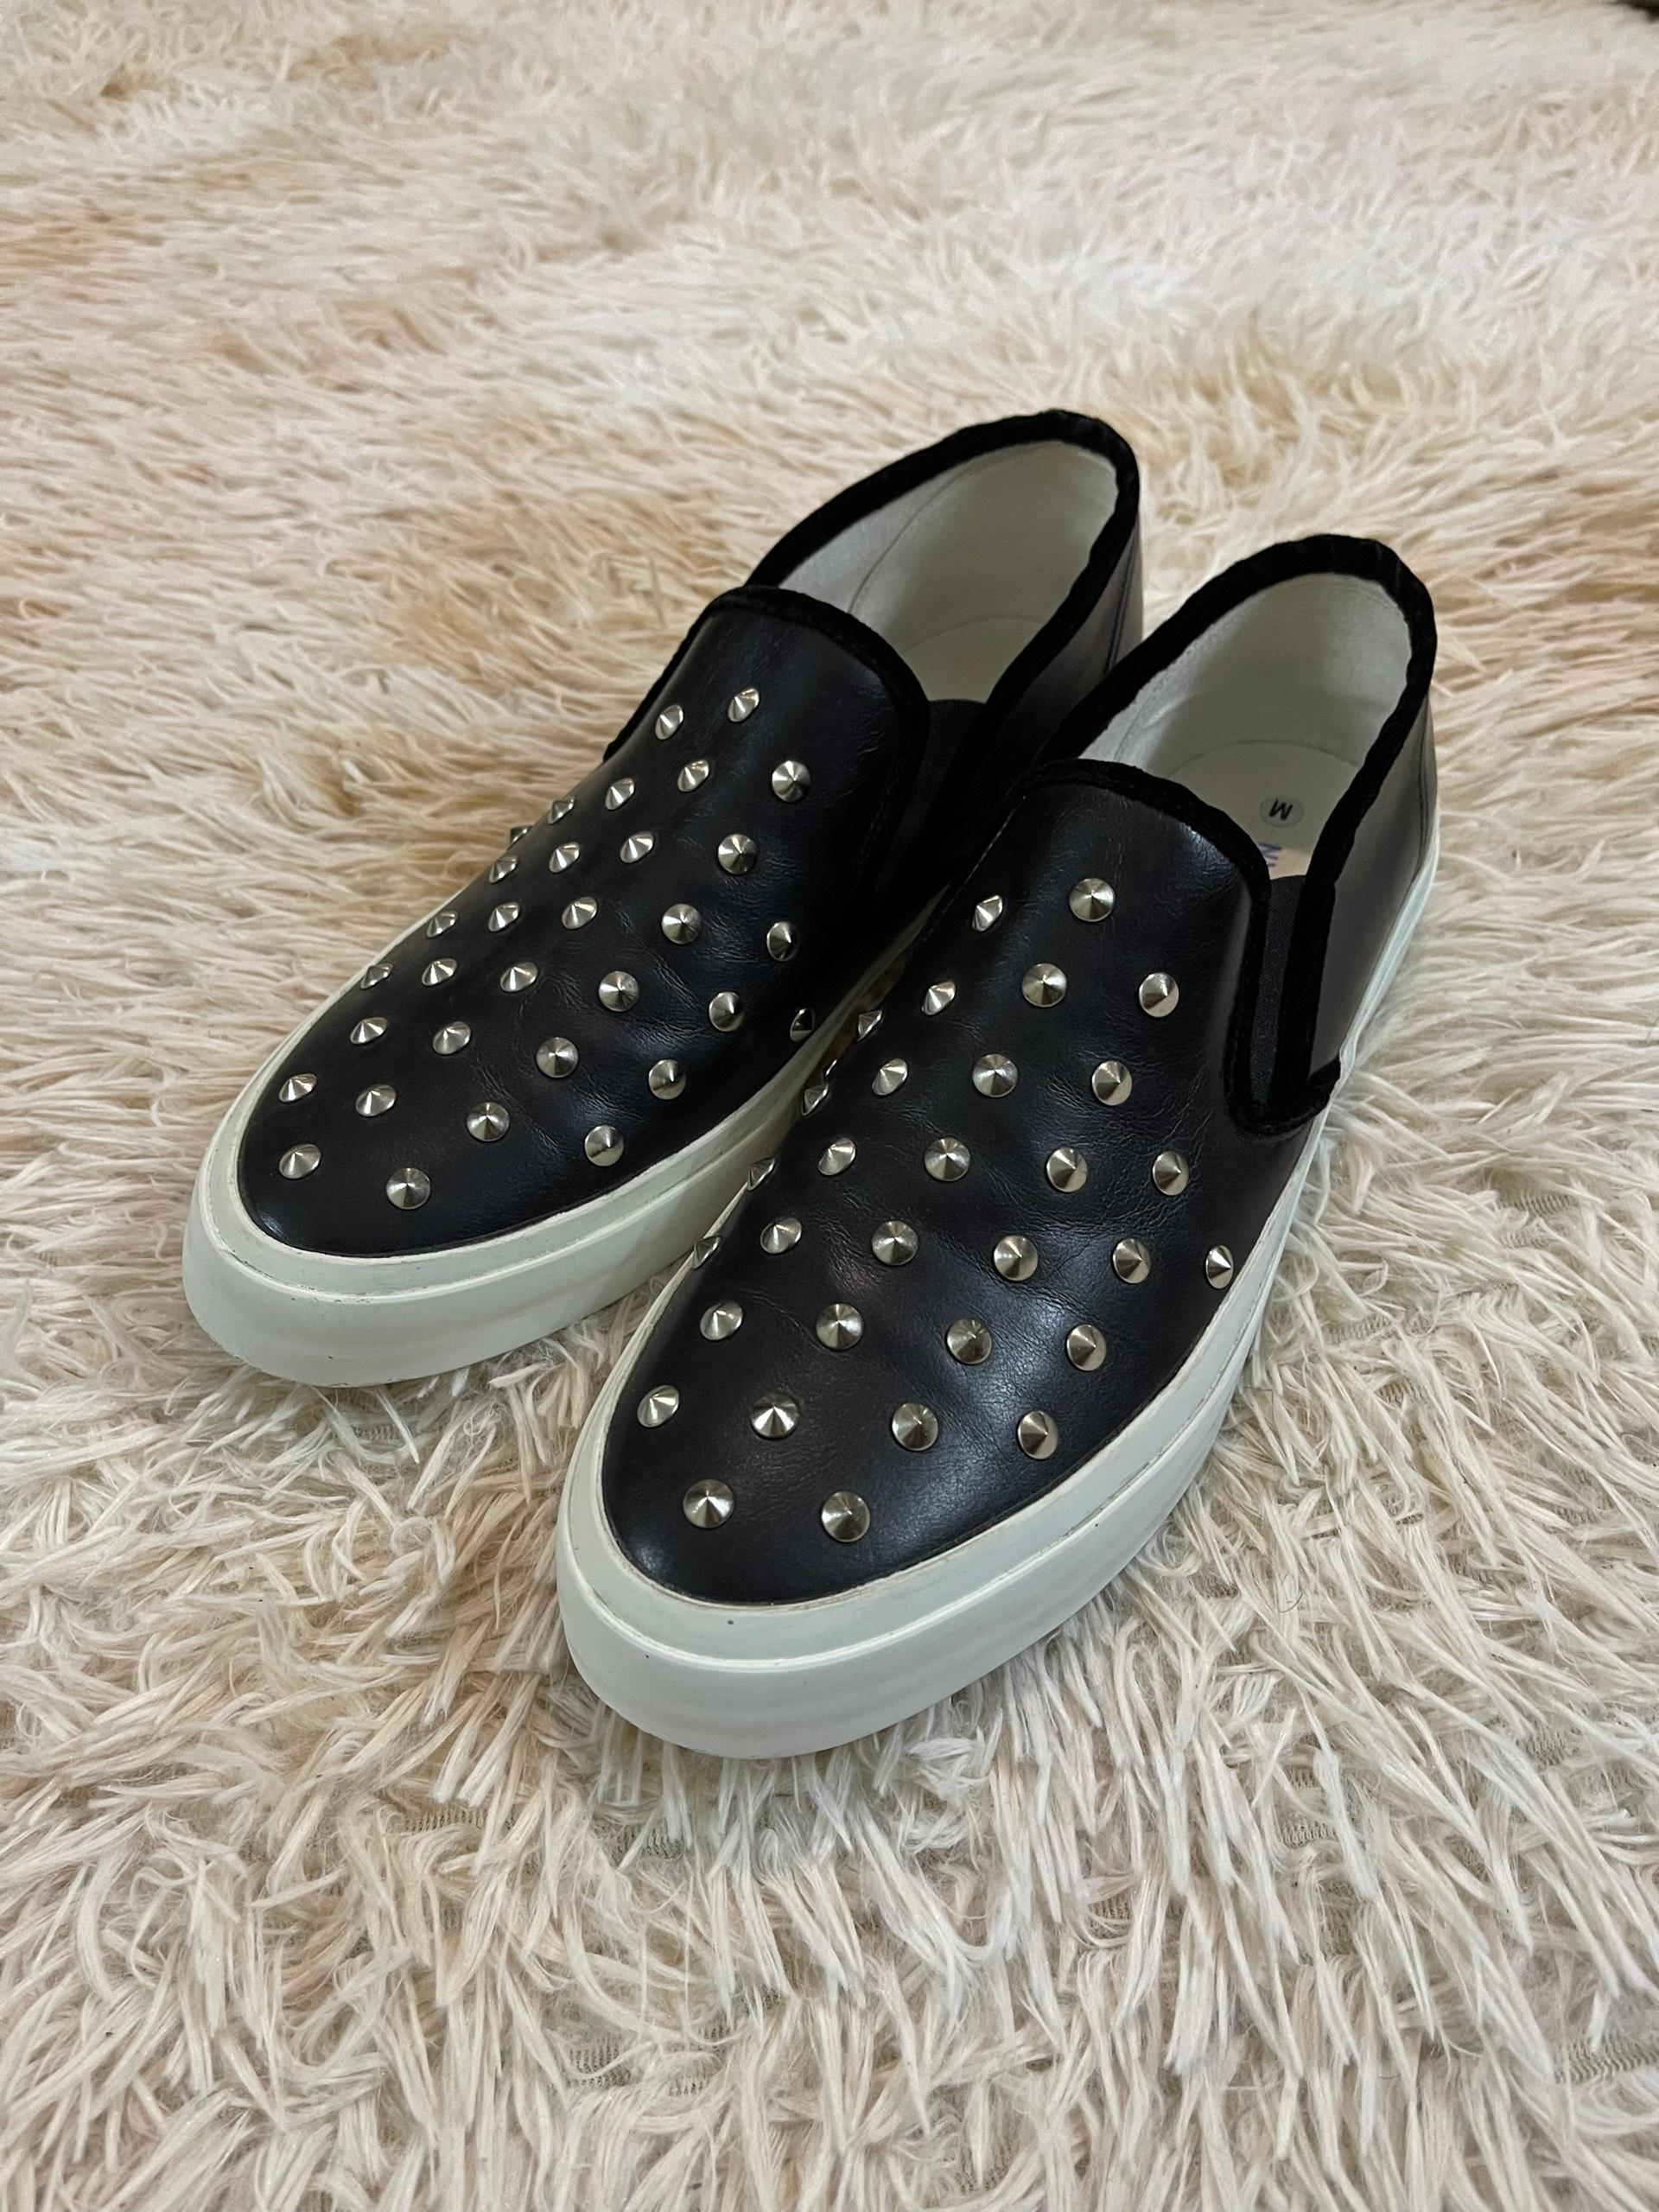 Junya Watanabe Spike Studded Slip-on Sneaker In Excellent Condition For Sale In Tương Mai Ward, Hoang Mai District